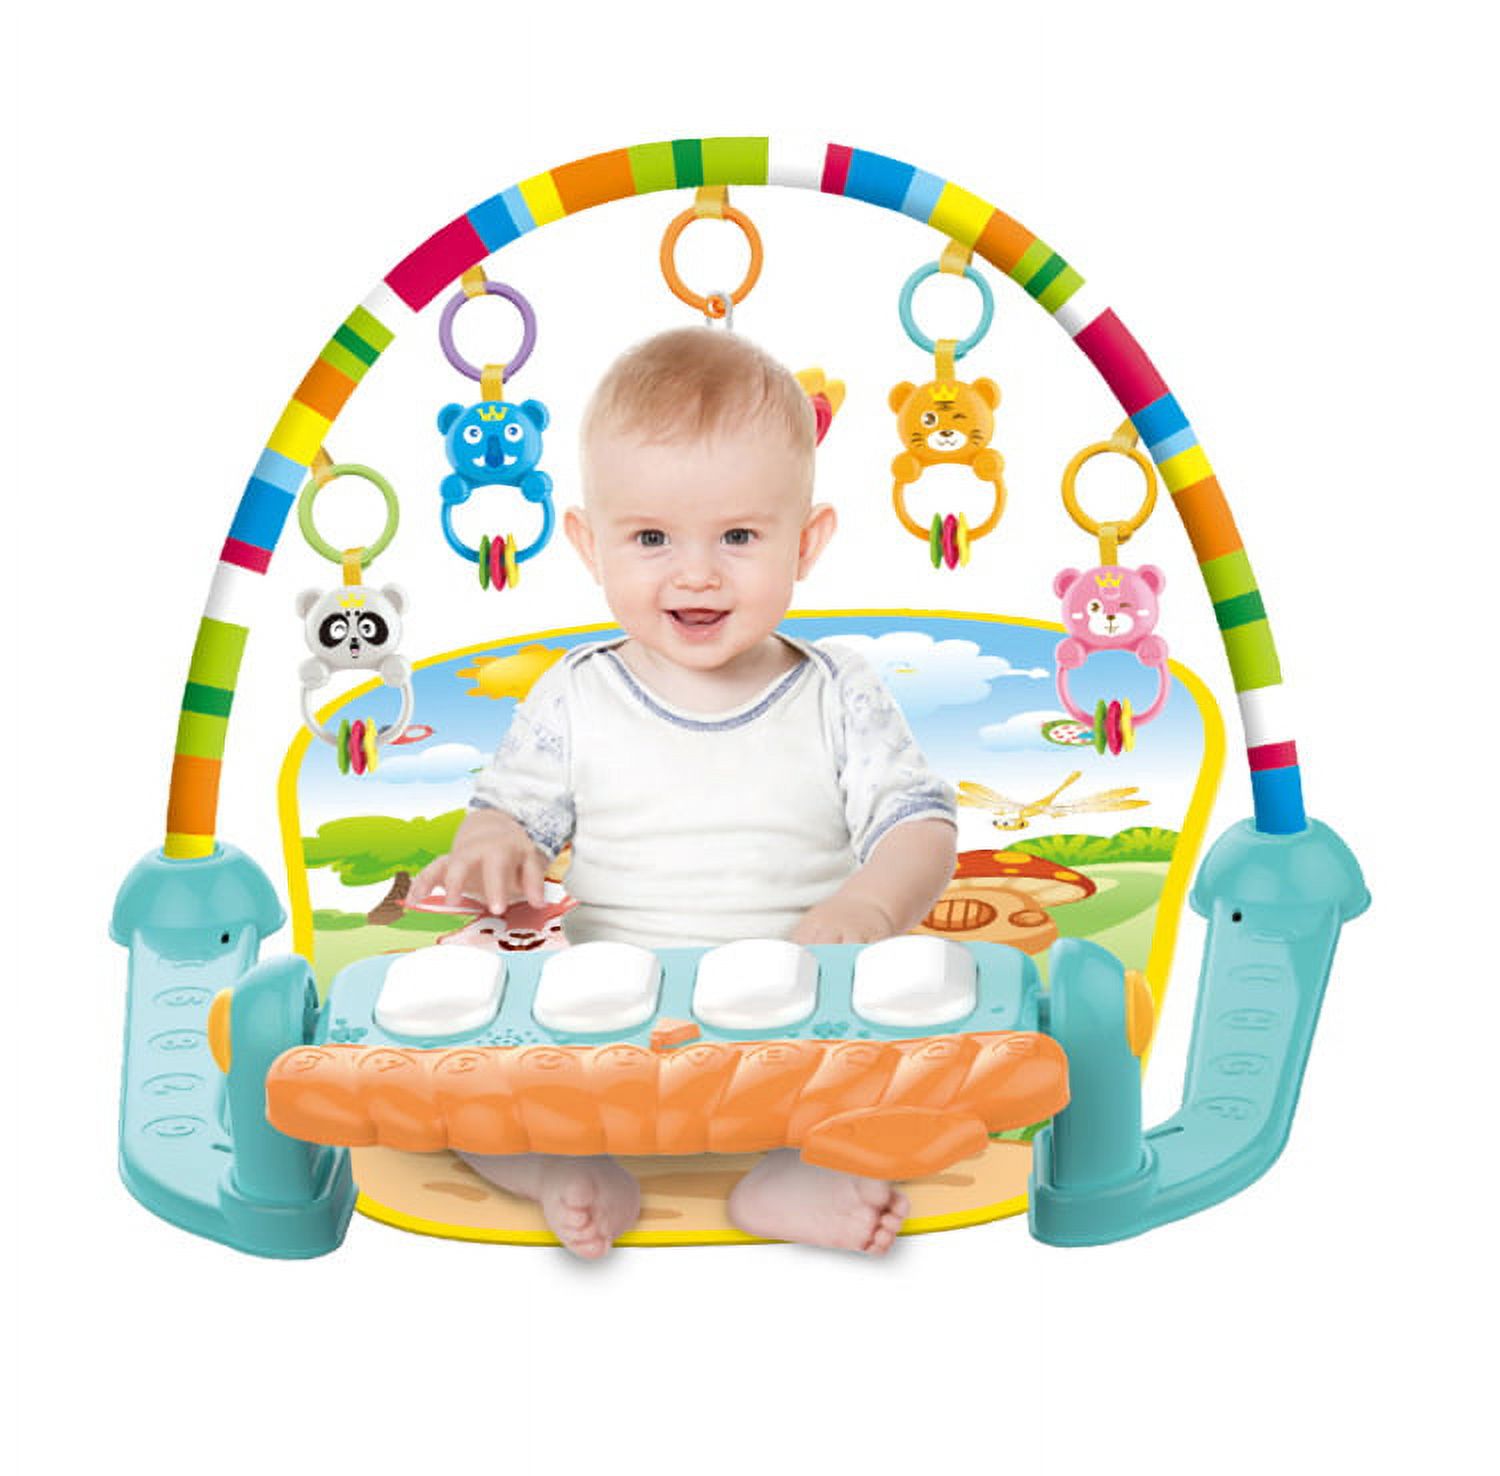 Baby Play Mat for Infant with Music and Mirror, Newborn Piano Activity Center Toys Gym Floor Playmat for Boys Girls - image 2 of 7